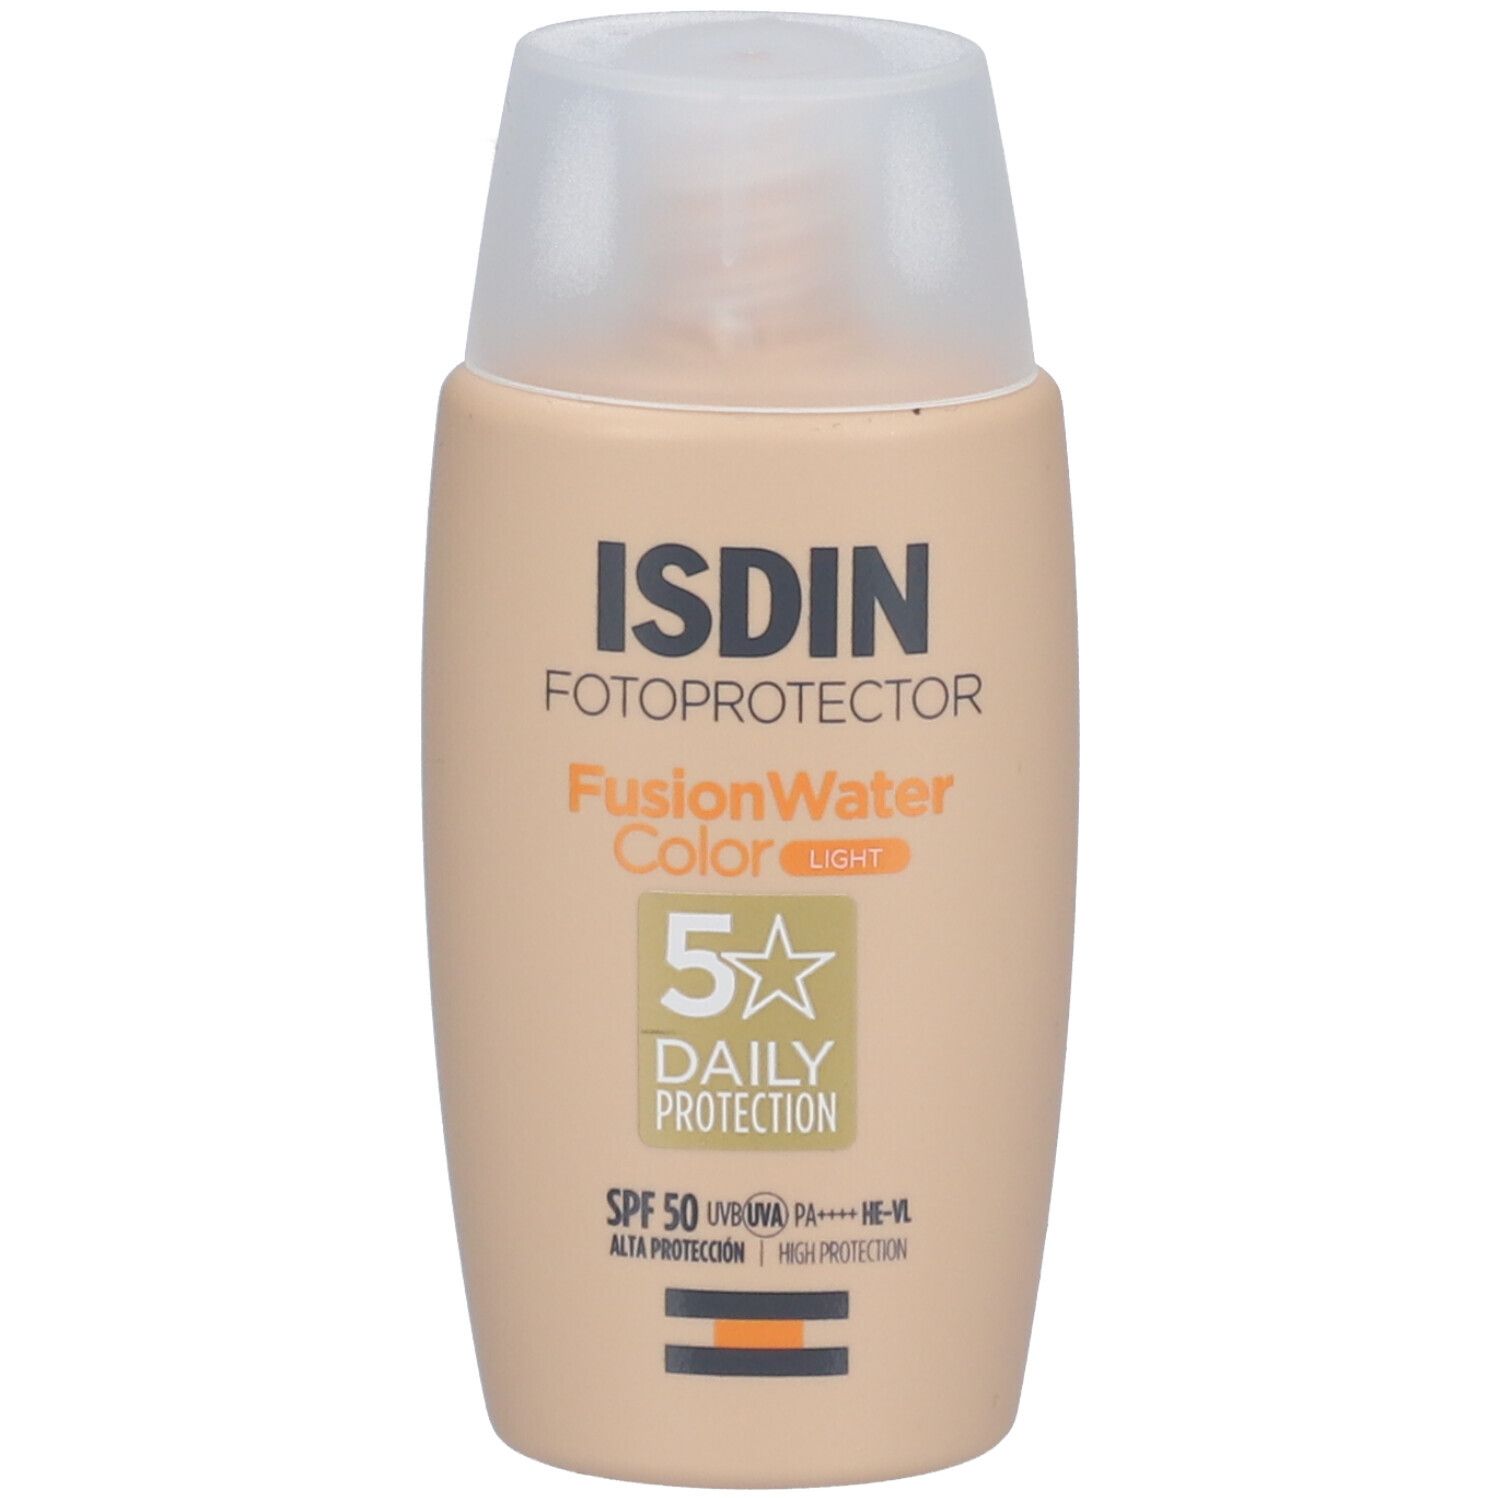 Isdin Fotoprotector Fusion Water Color Light SPF 50